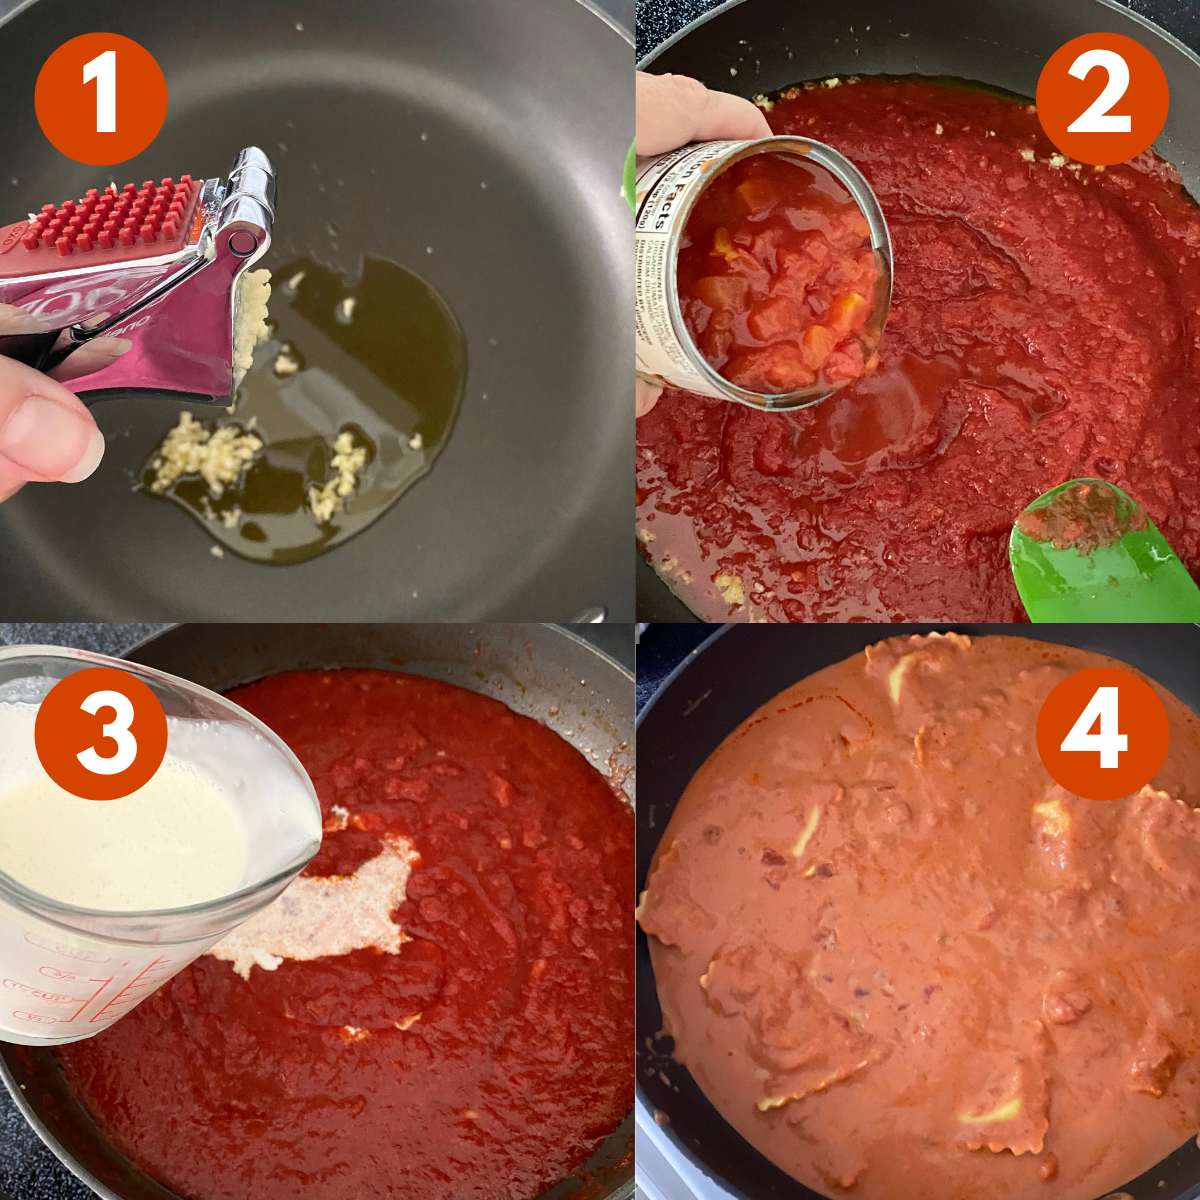 Numbered directions to make lobster ravioli sauce. 1) Garlic press over a skillet with olive oil. 2) Can of diced tomatoes being poured into a skillet with crushed tomatoes in it. 3) Heavy whipping cream being poured into the skillet. 4) Lobster ravioli in skillet with sauce.